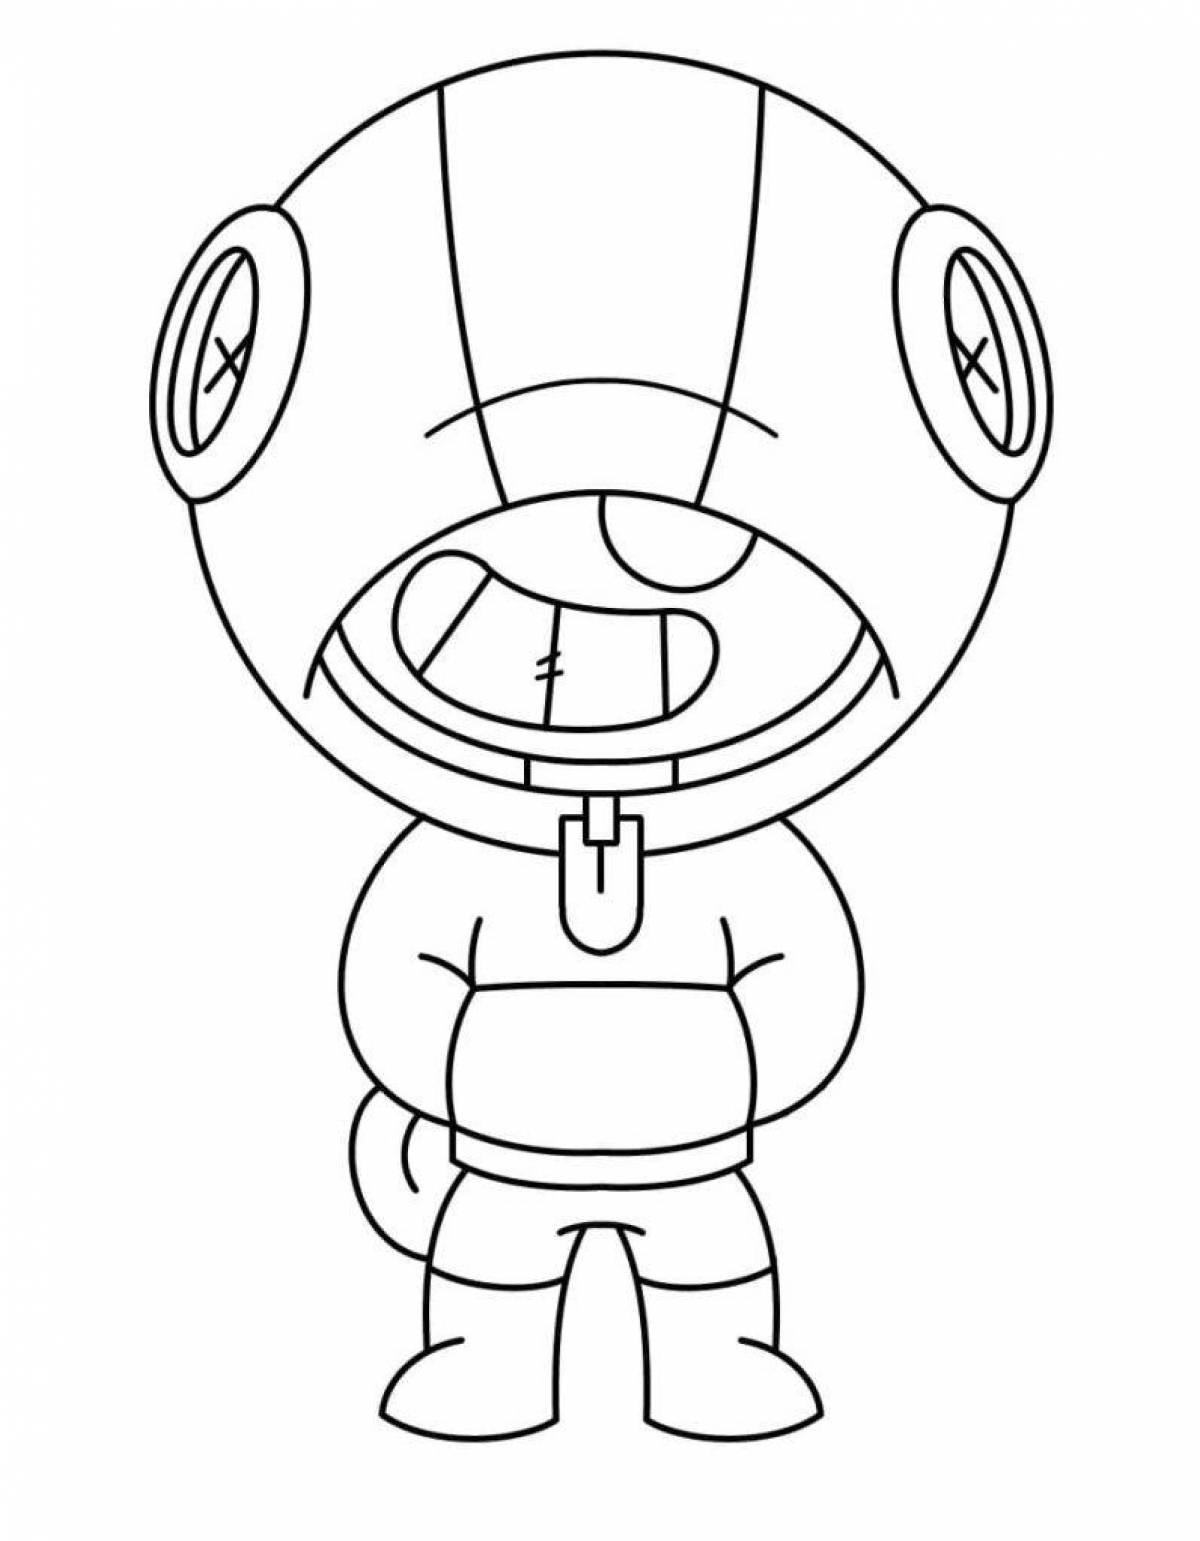 Animated leon coloring page